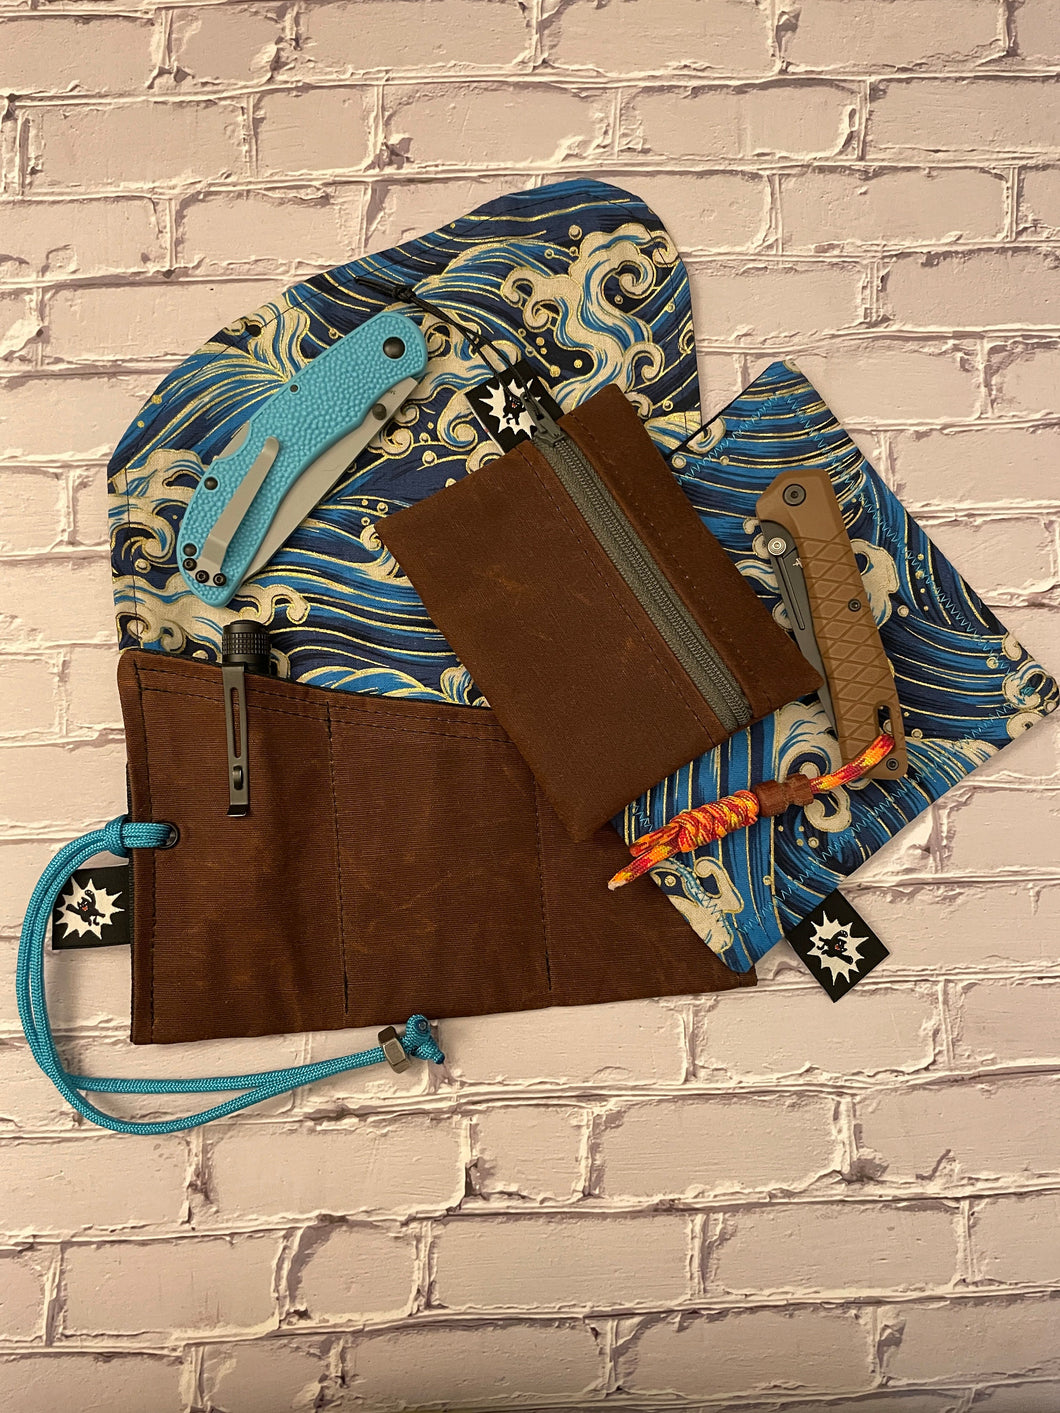 EDC Hank Set | Handkerchief for Every Day Carry |  Gear for EDC Organizer Pouch | Gift Set | Pocket Dump Combo Pack | Seigaiha Wave Blue